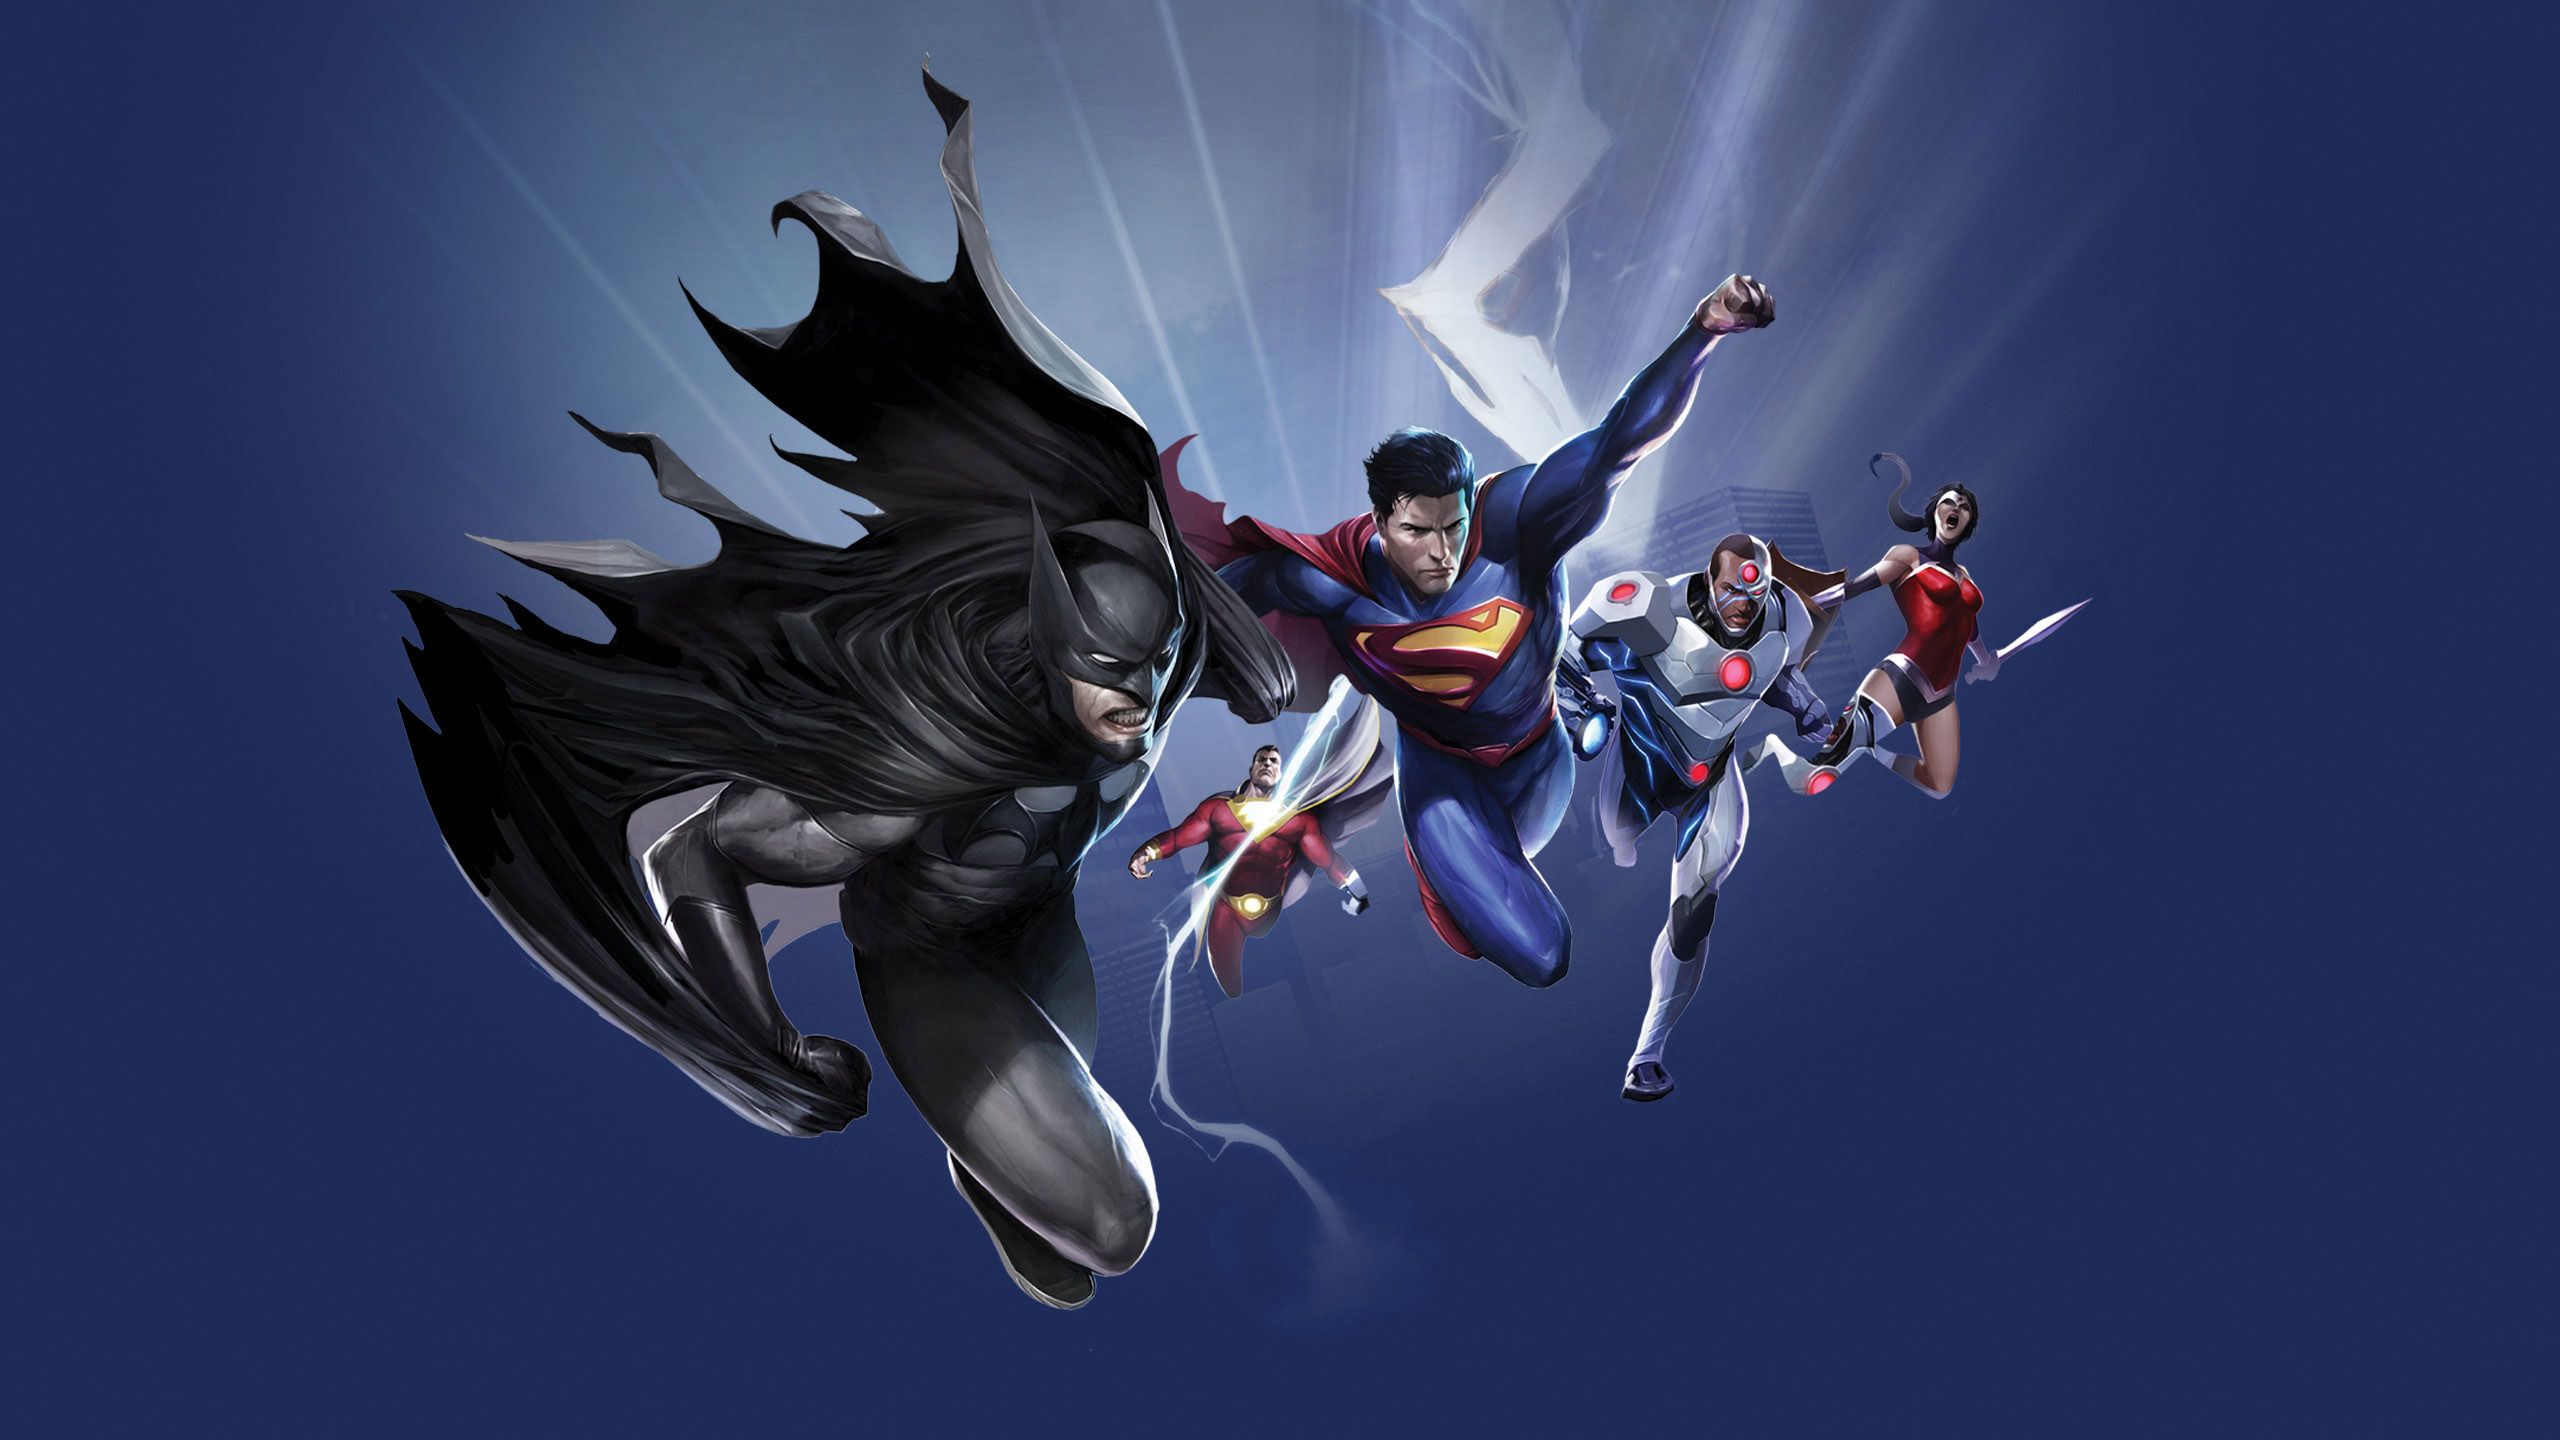 justice league war streaming online